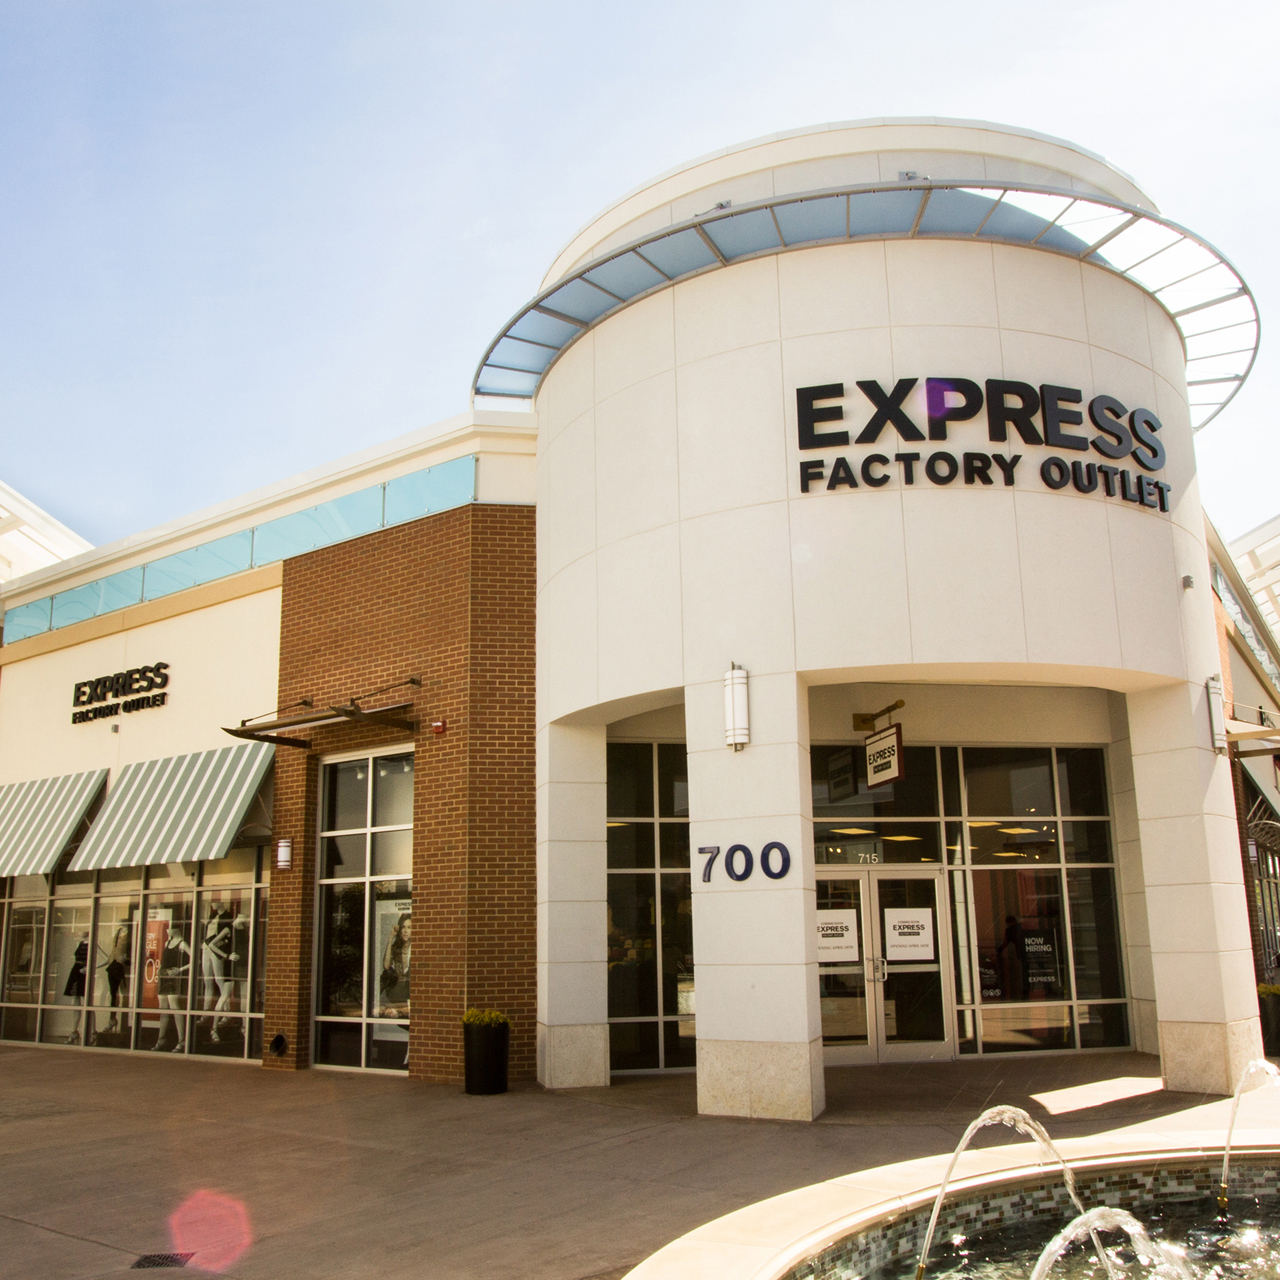 Express Clothing Store Locator | Find Women's & Men's Clothing Near Me